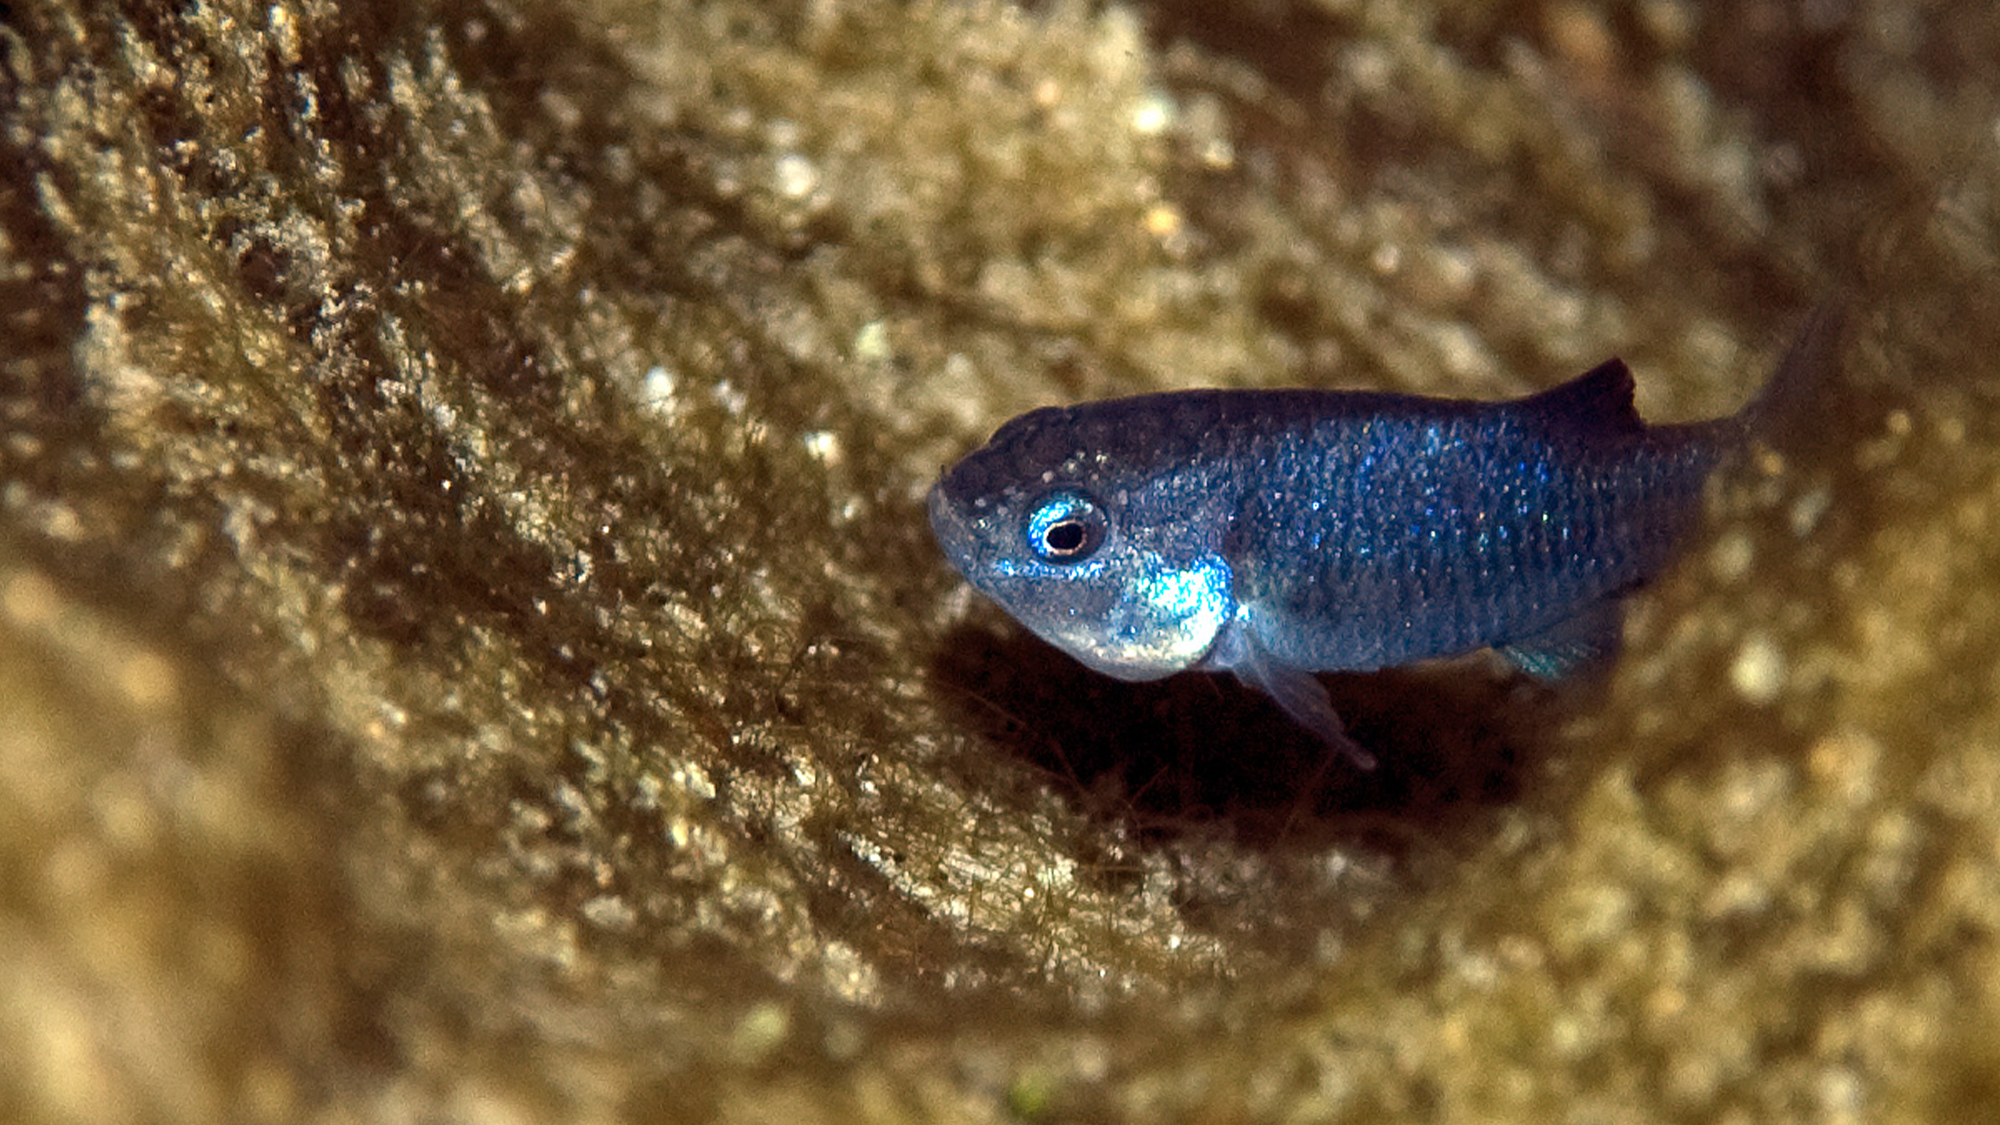 a small, blue fish called the Devils Hole pupfish swims in a hole